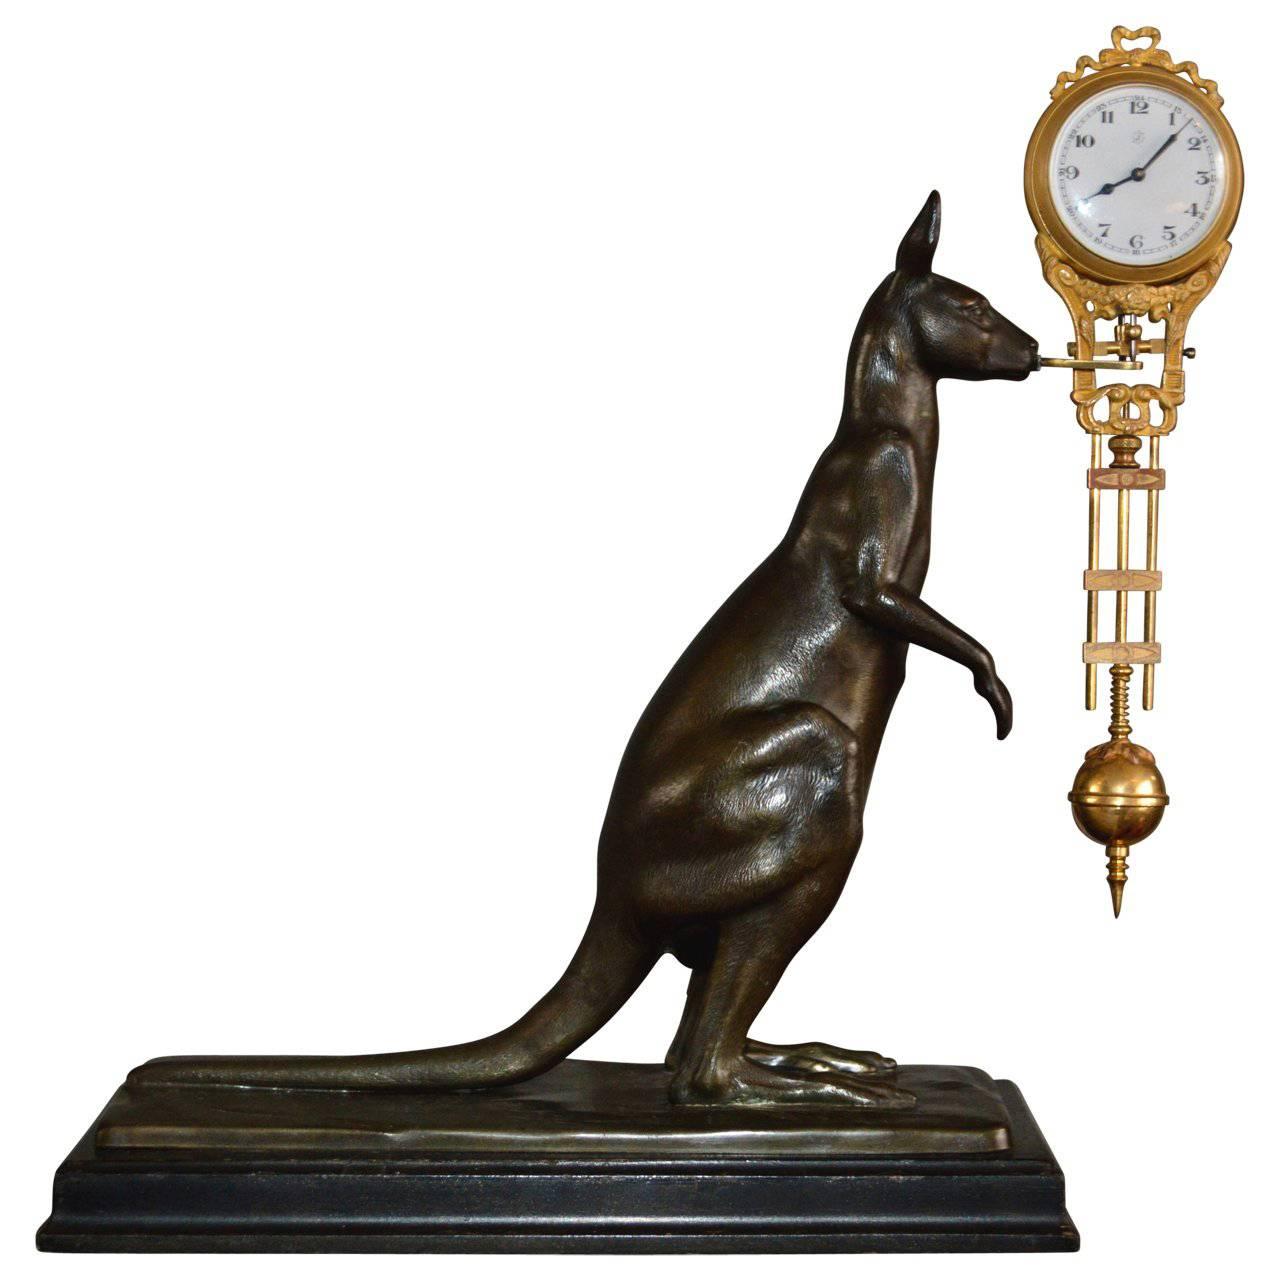 Kangaroo spelter clock by Junghans, with eight-day movement, enamel deal with Arabic numerals, blue-steel hands. The kangaroo stands on a black-stained wooden base.